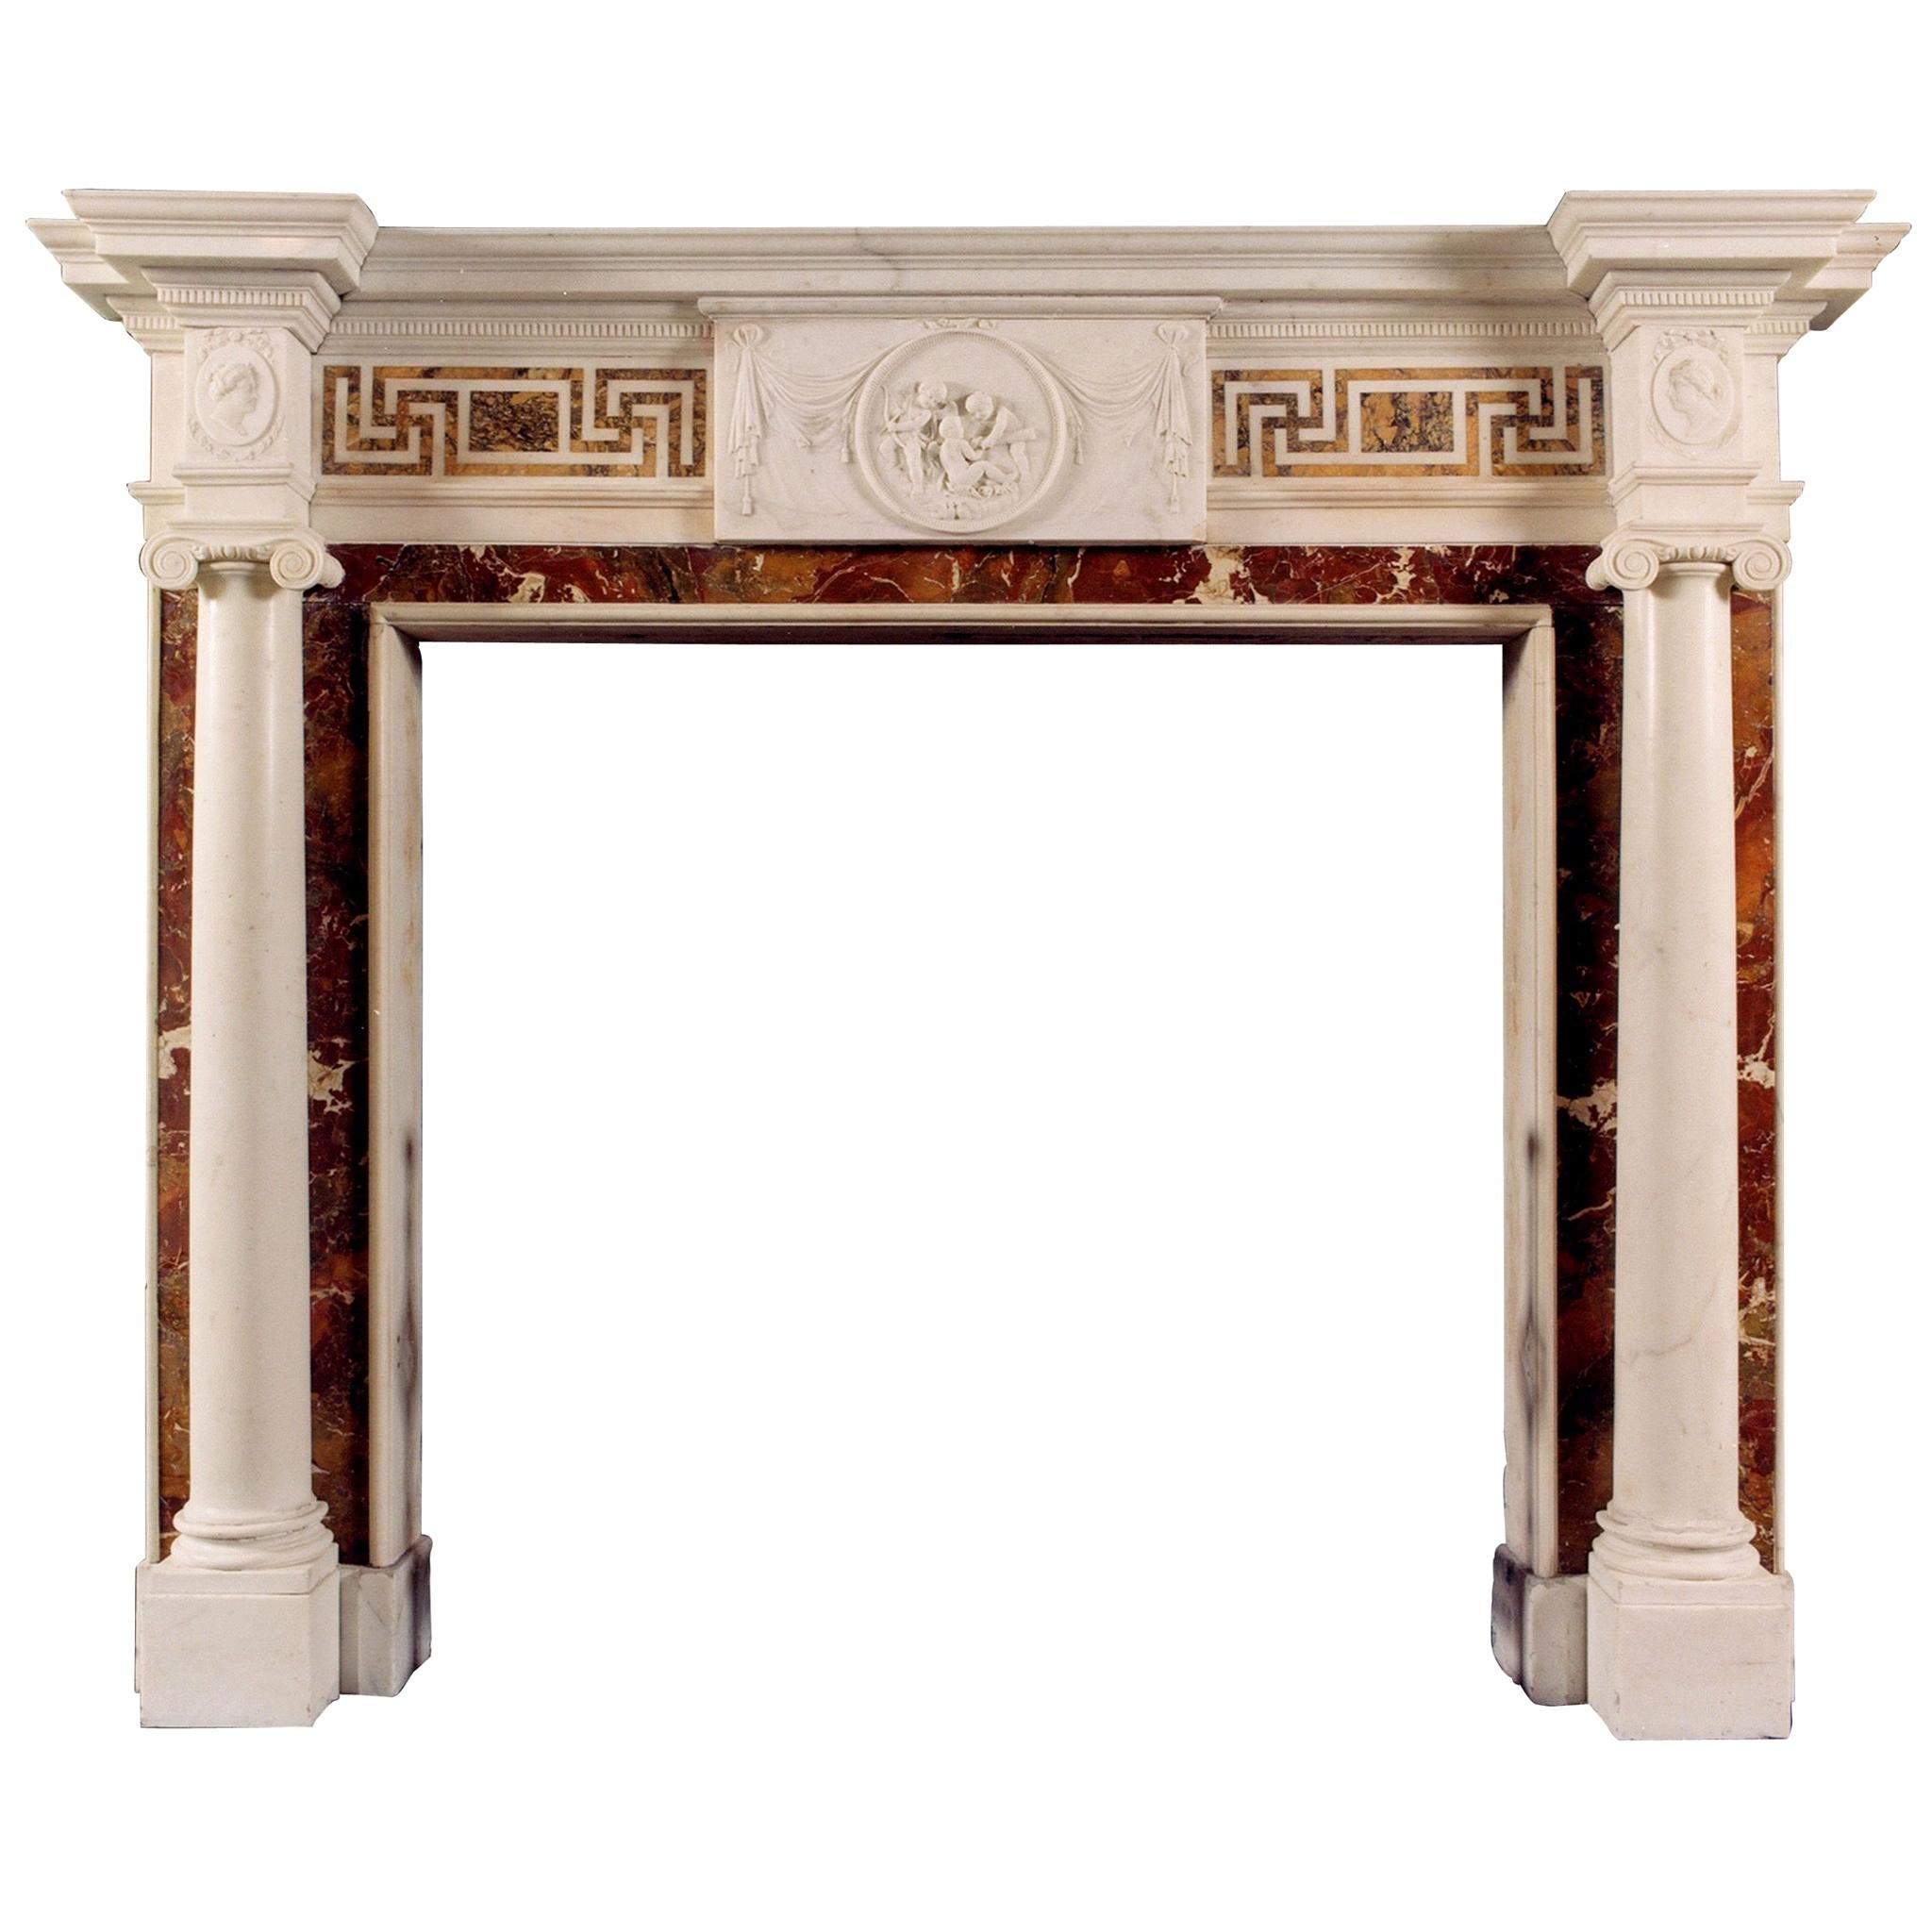 Antique English Statuary Fireplace With Inlaid Sienna & Jasper Marble